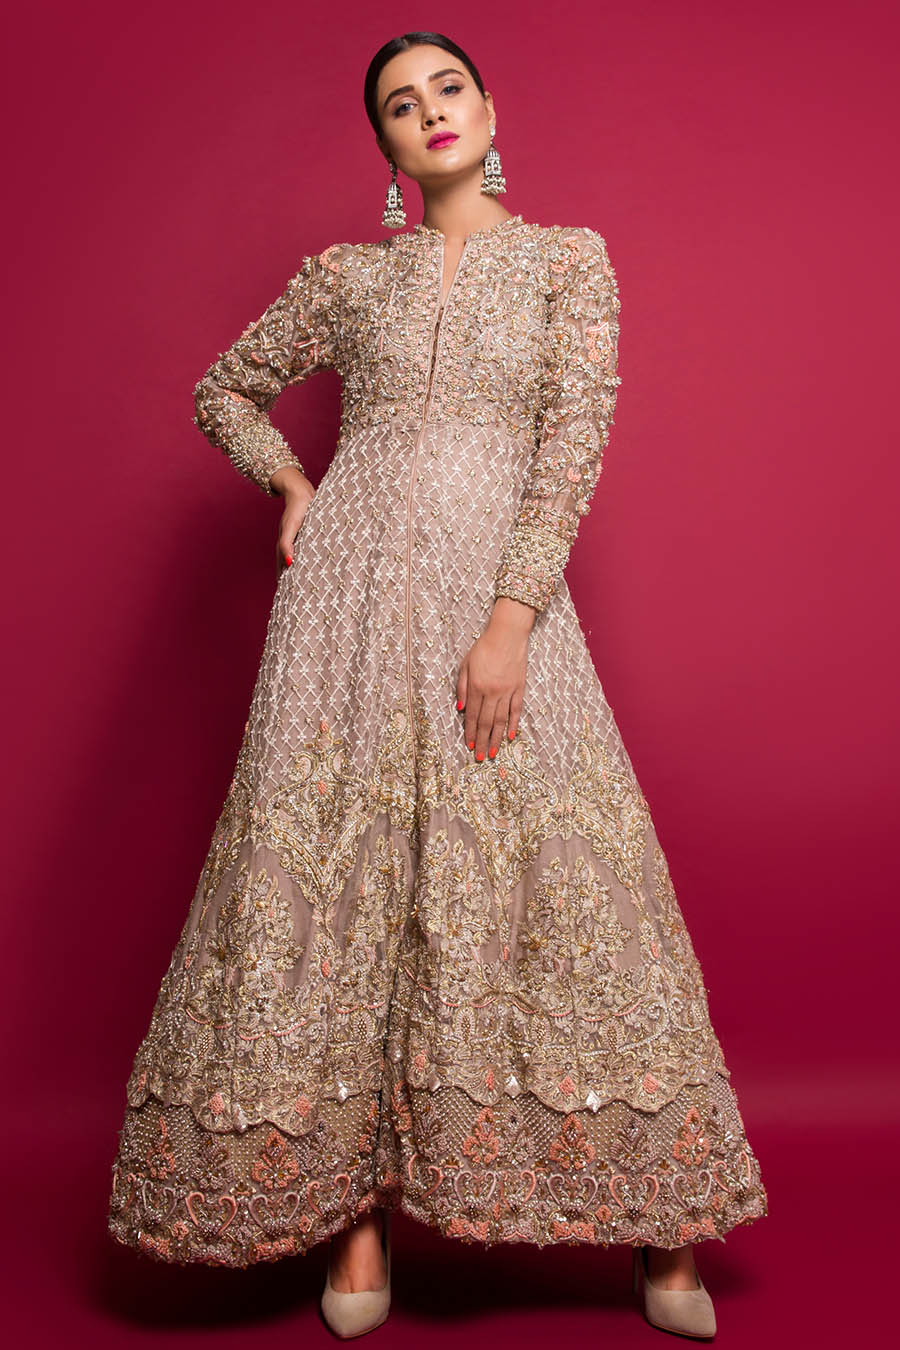 Formal Gown by Moraab for Pakistani Wedding